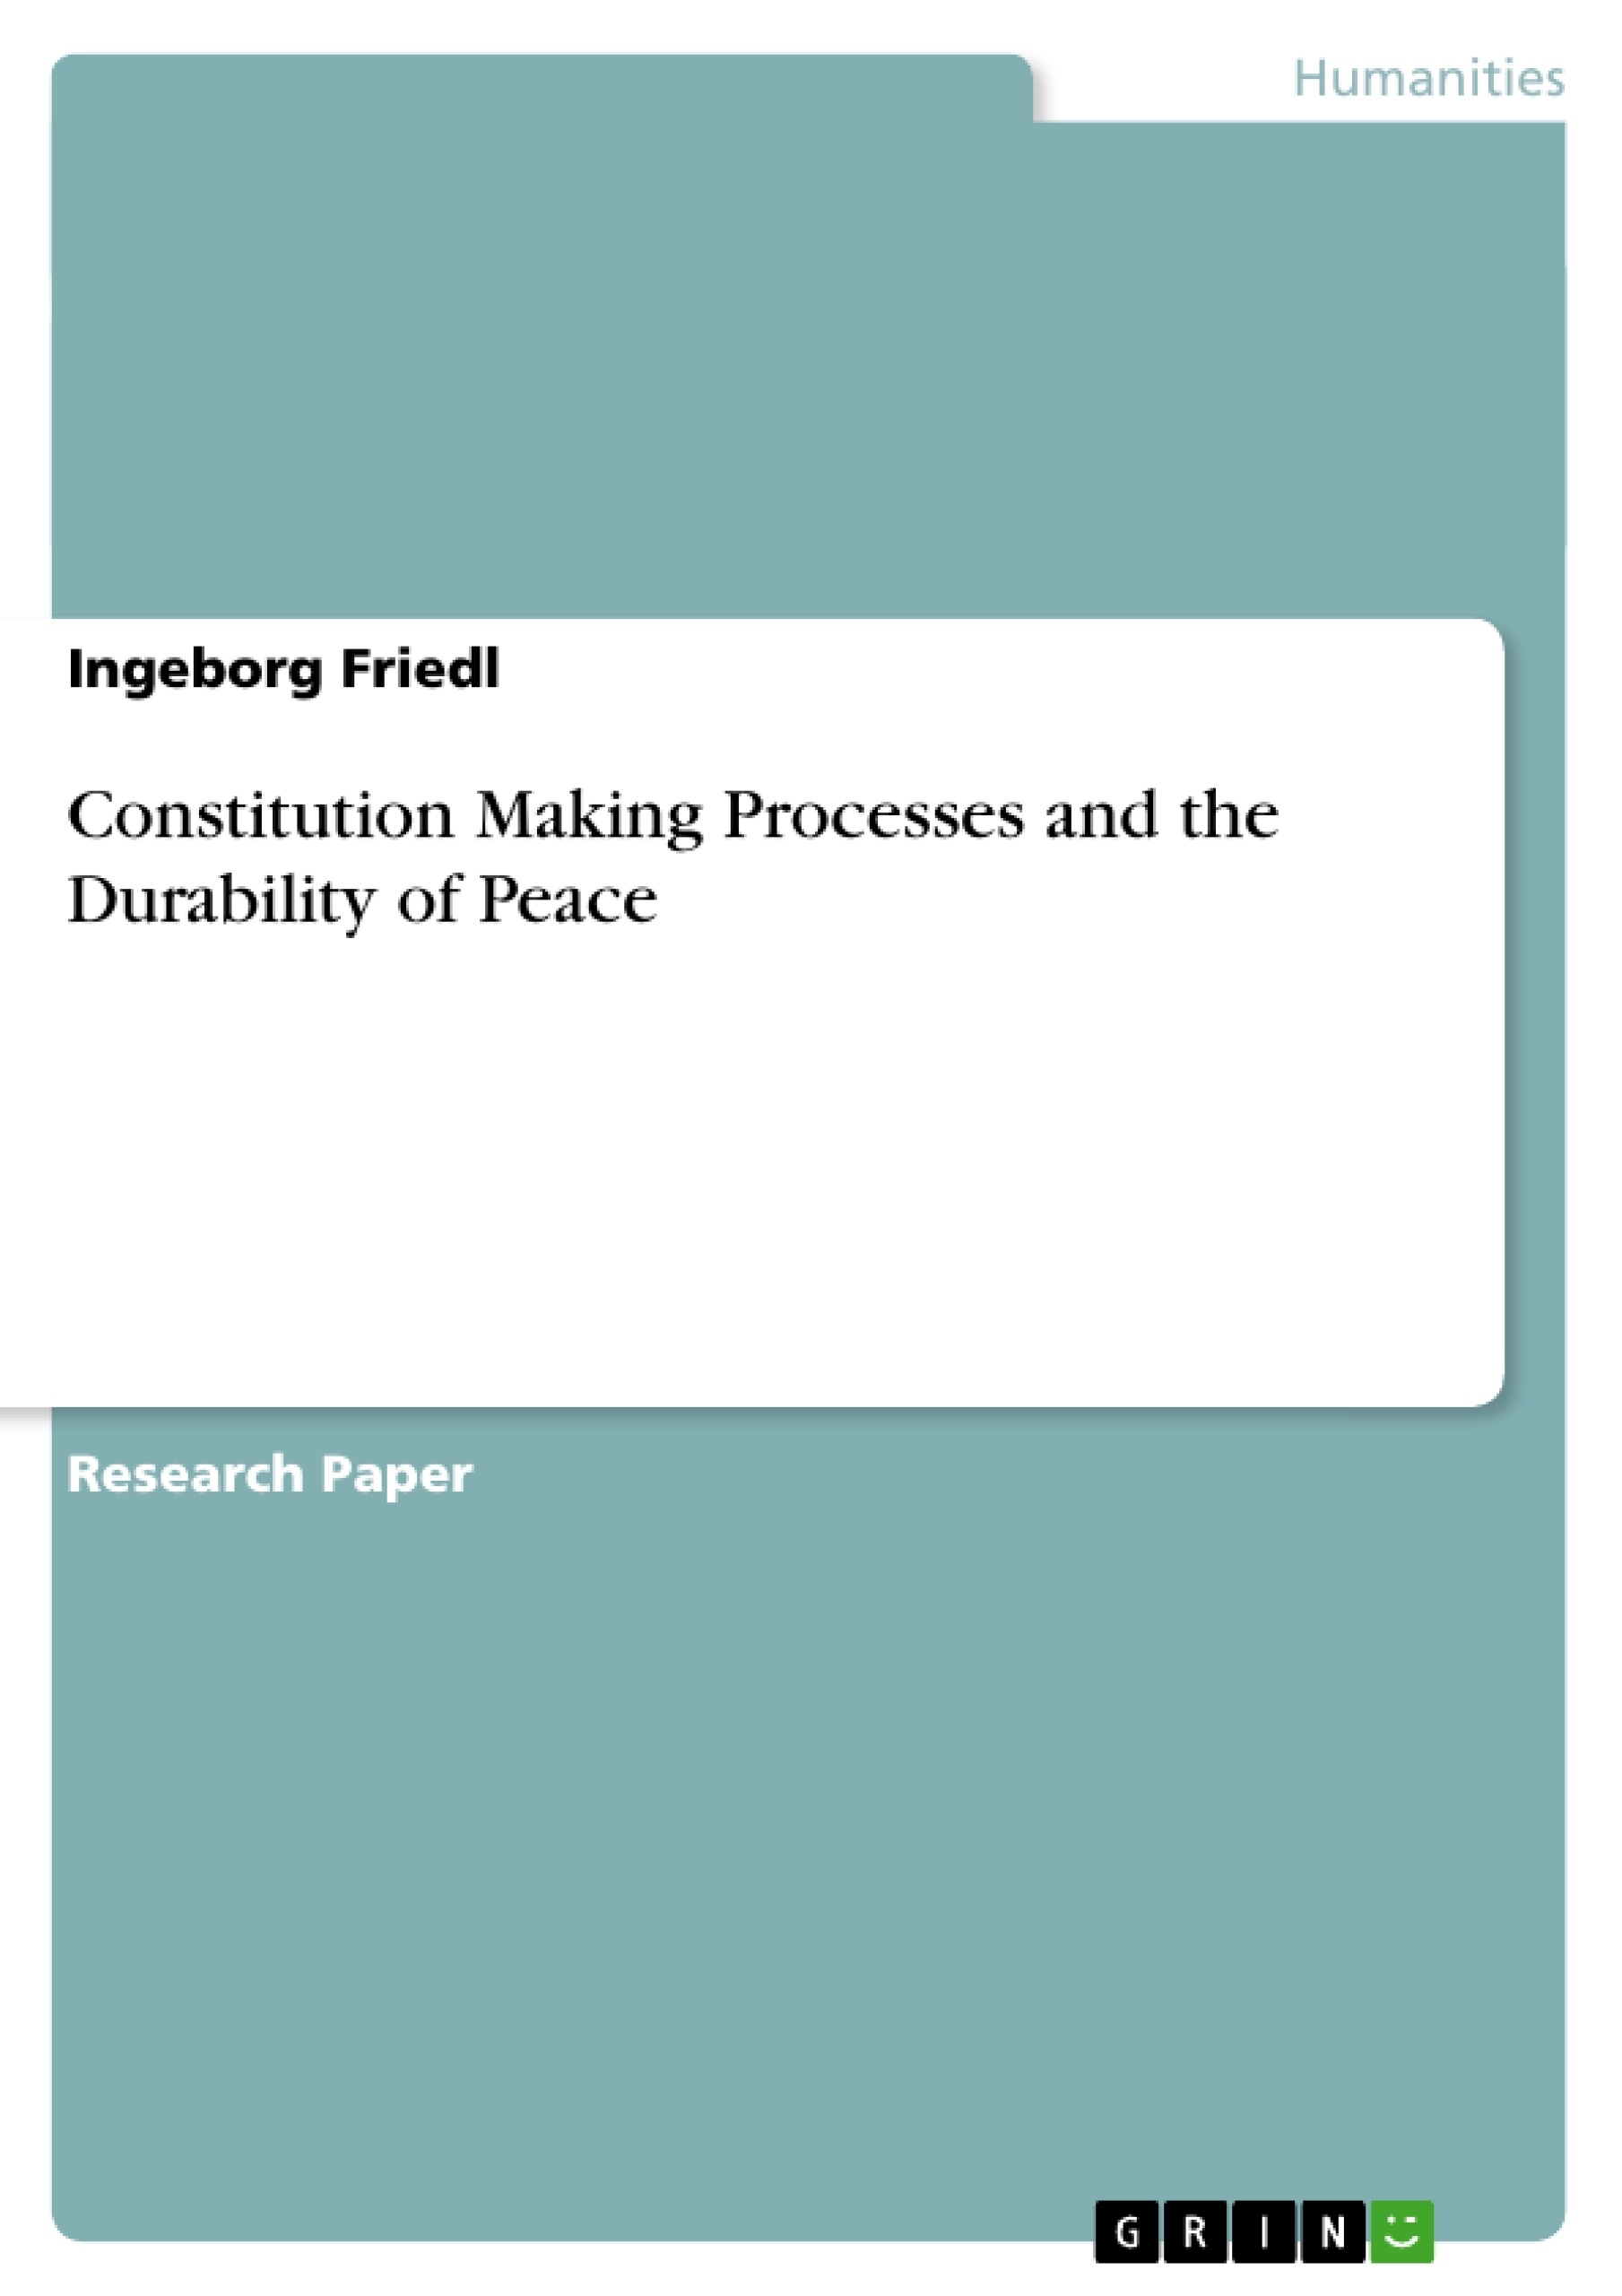 Title: Constitution Making Processes and the Durability of Peace